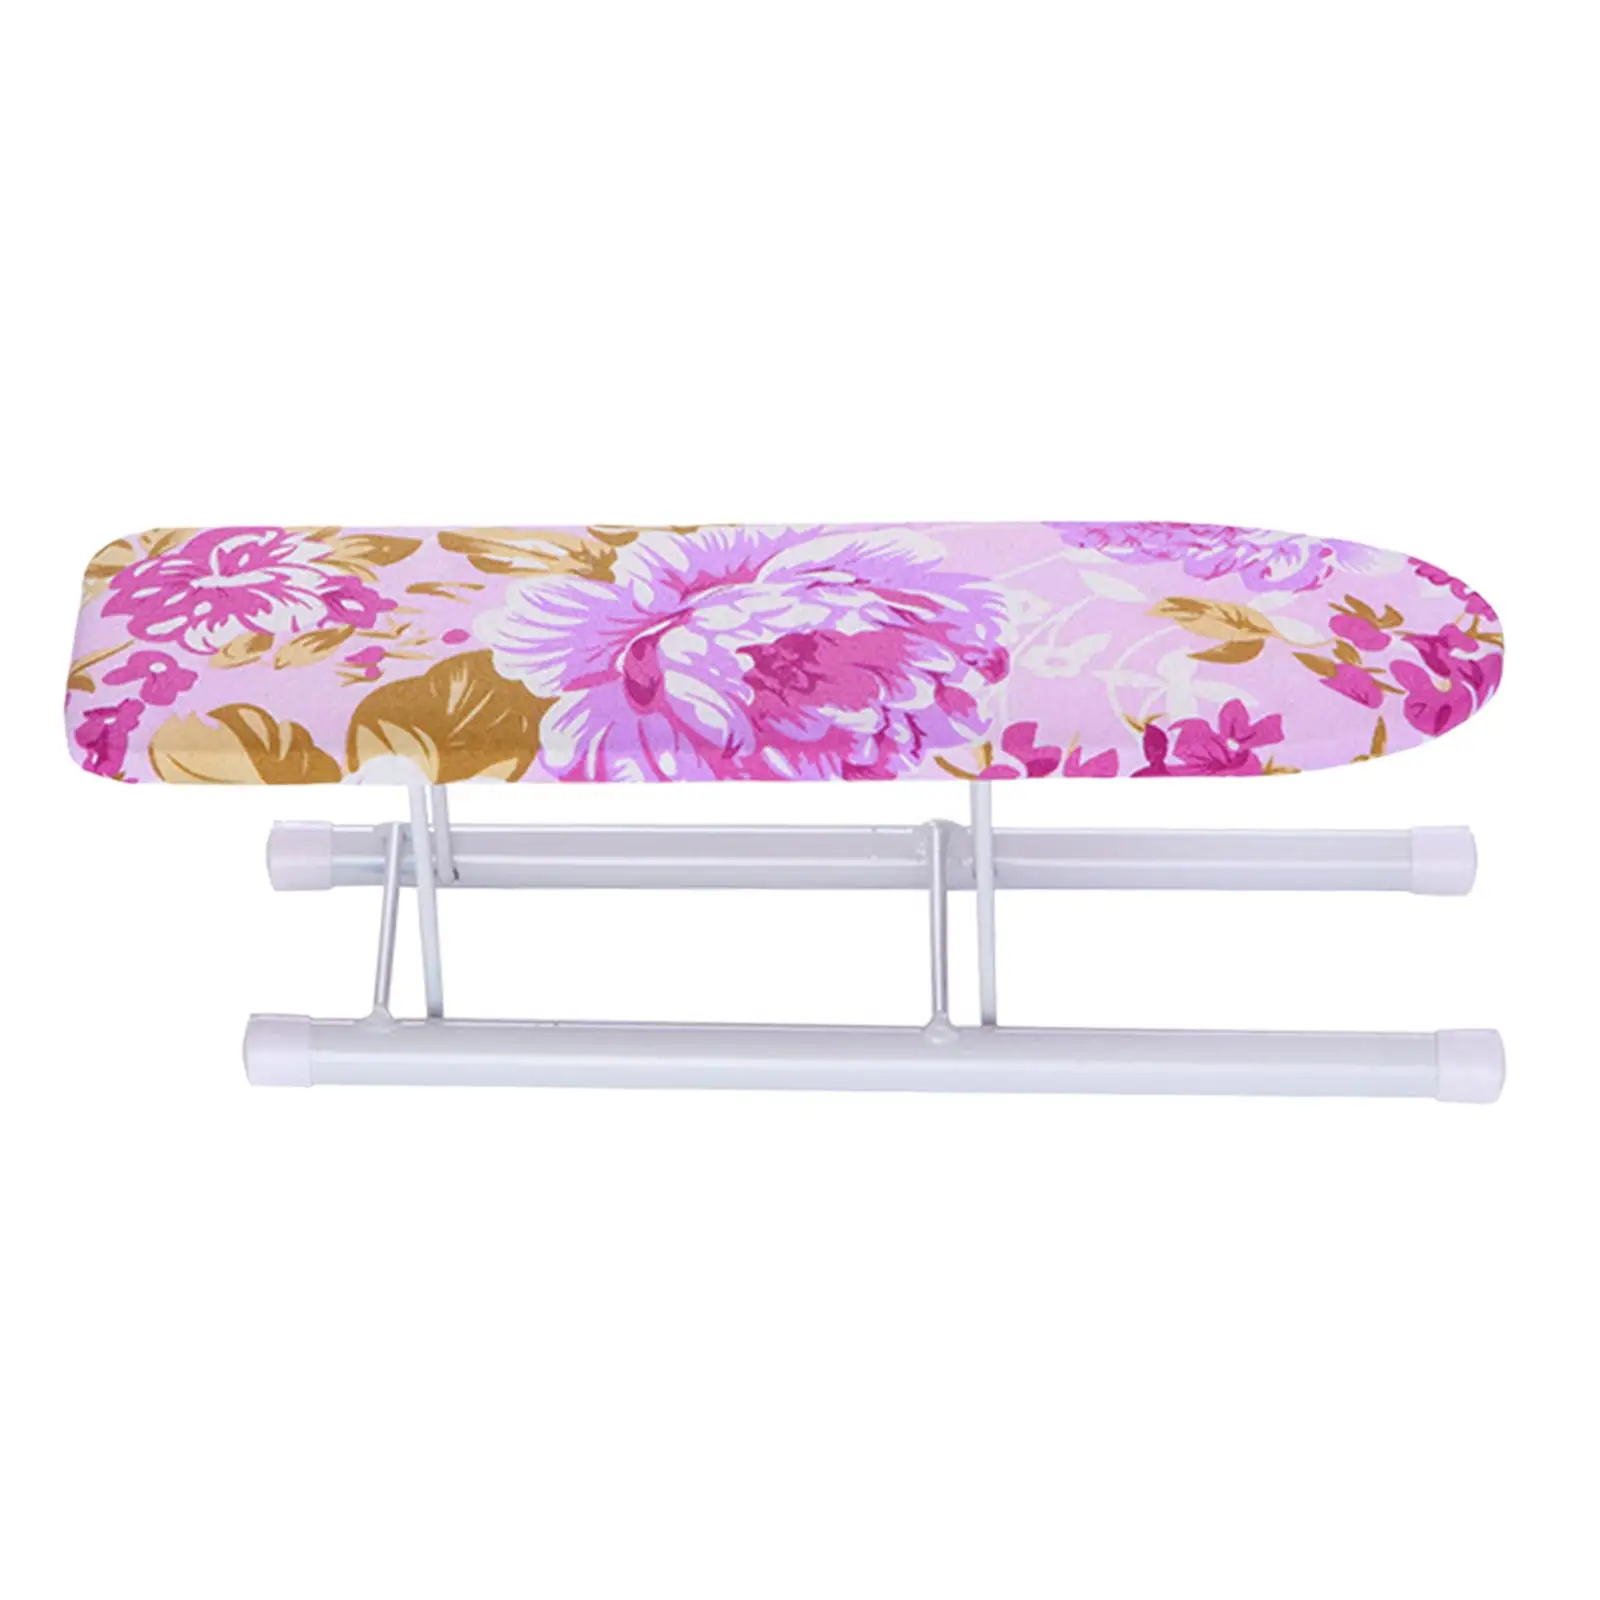 Mini Ironing Board Ironing Cuffs Neckline Sleeve Ironing Table for Household